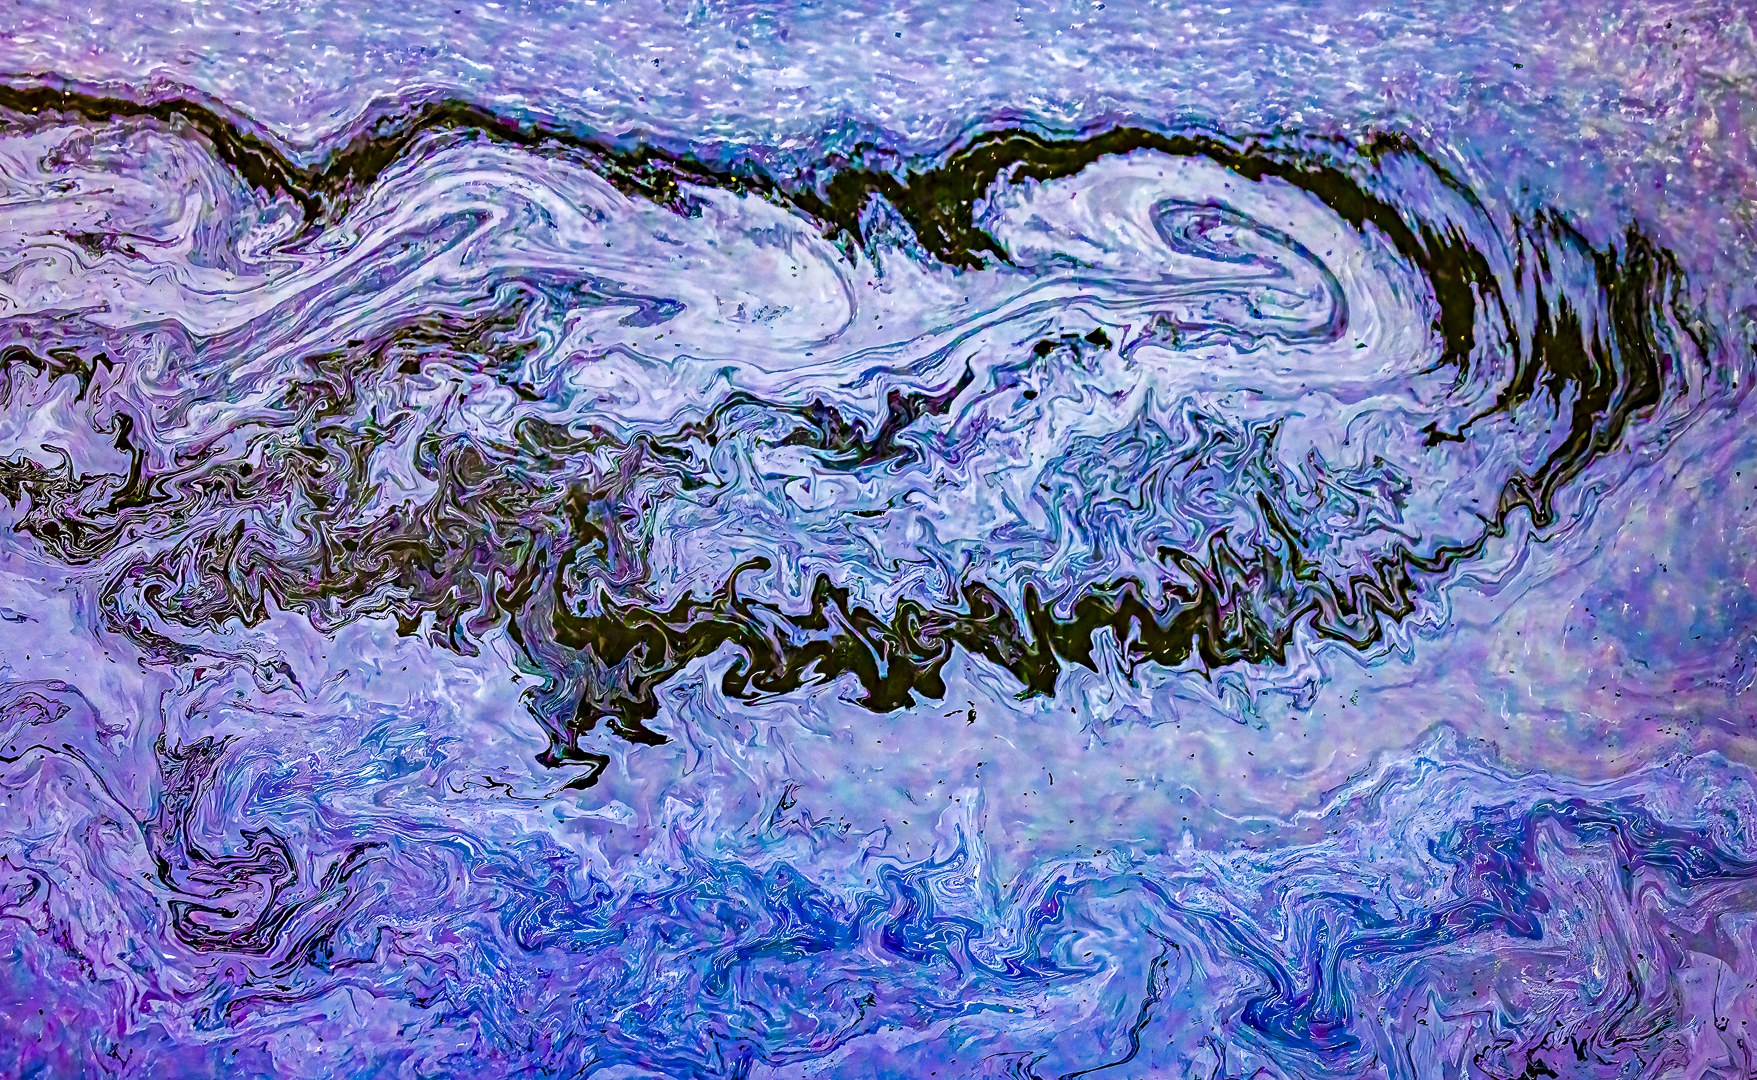 Oil on the water